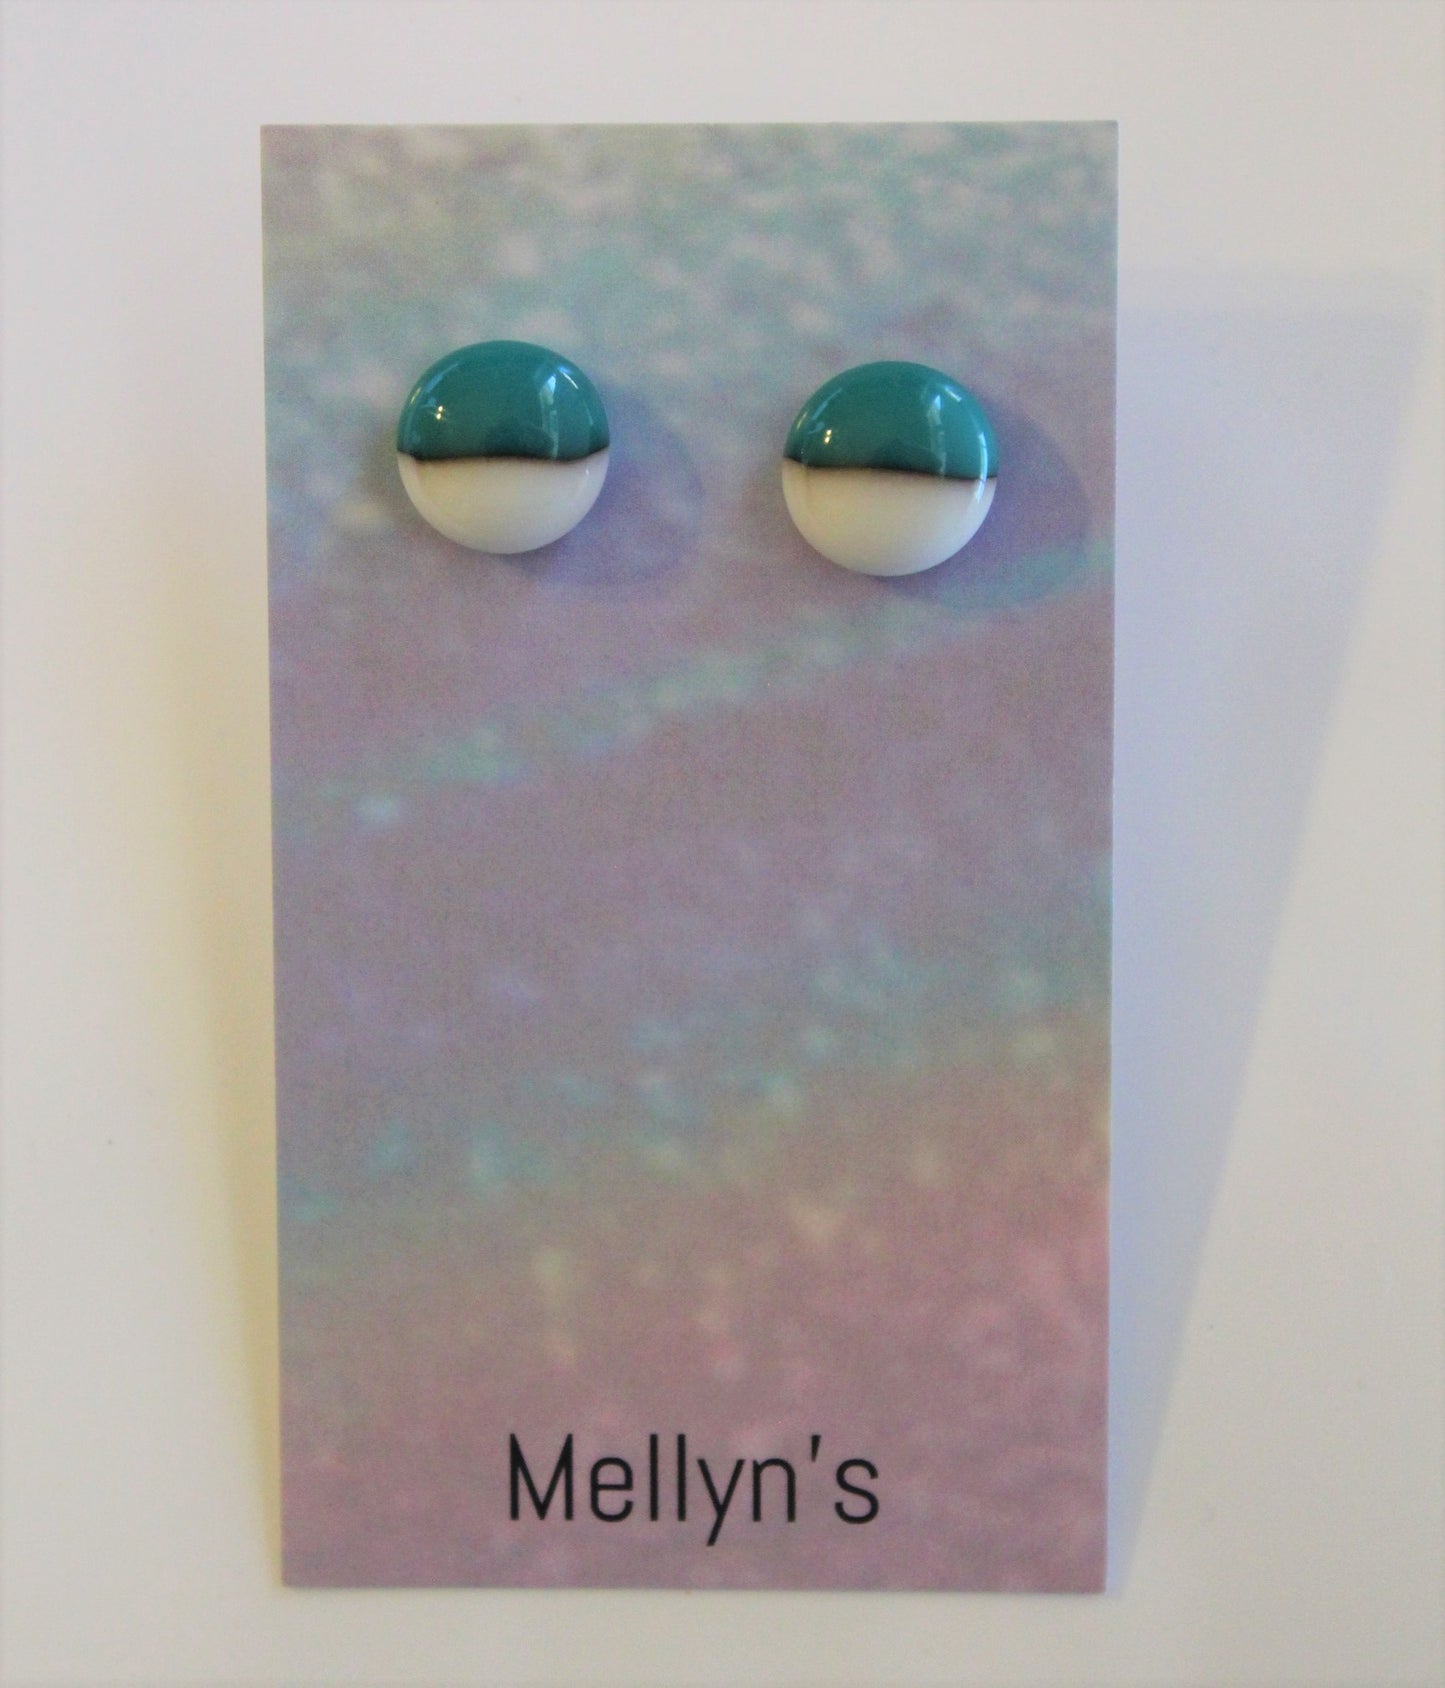 Peacock Green and Cream Fused Glass Earrings